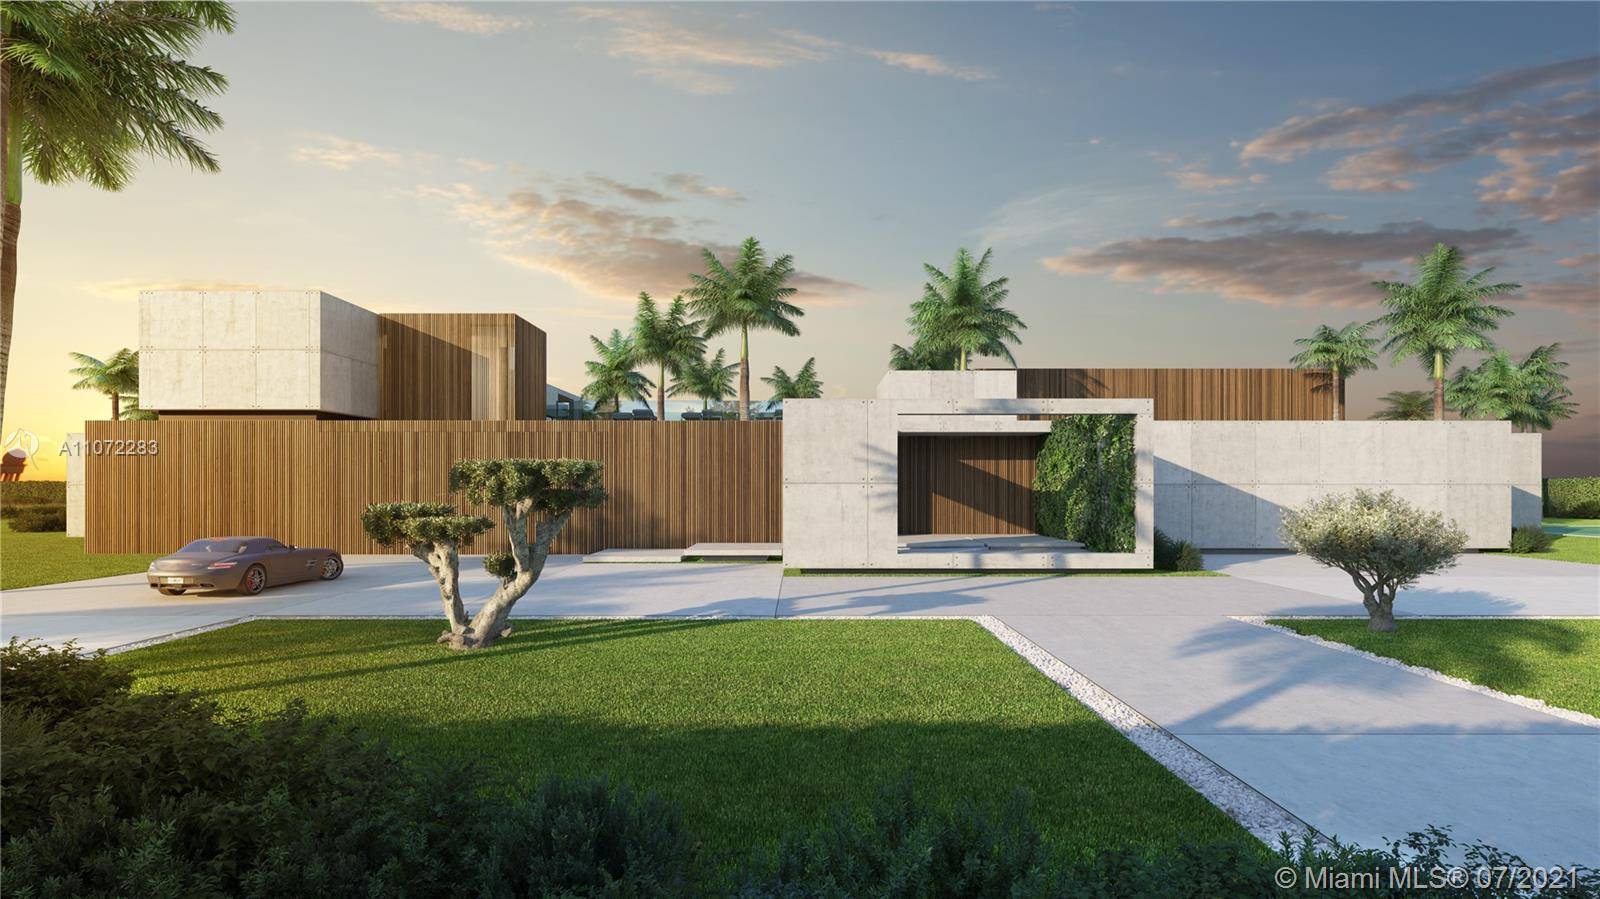 Estate B is a stunning contemporary villa being developed in the ultra luxury private gated community of AKAI Estates.